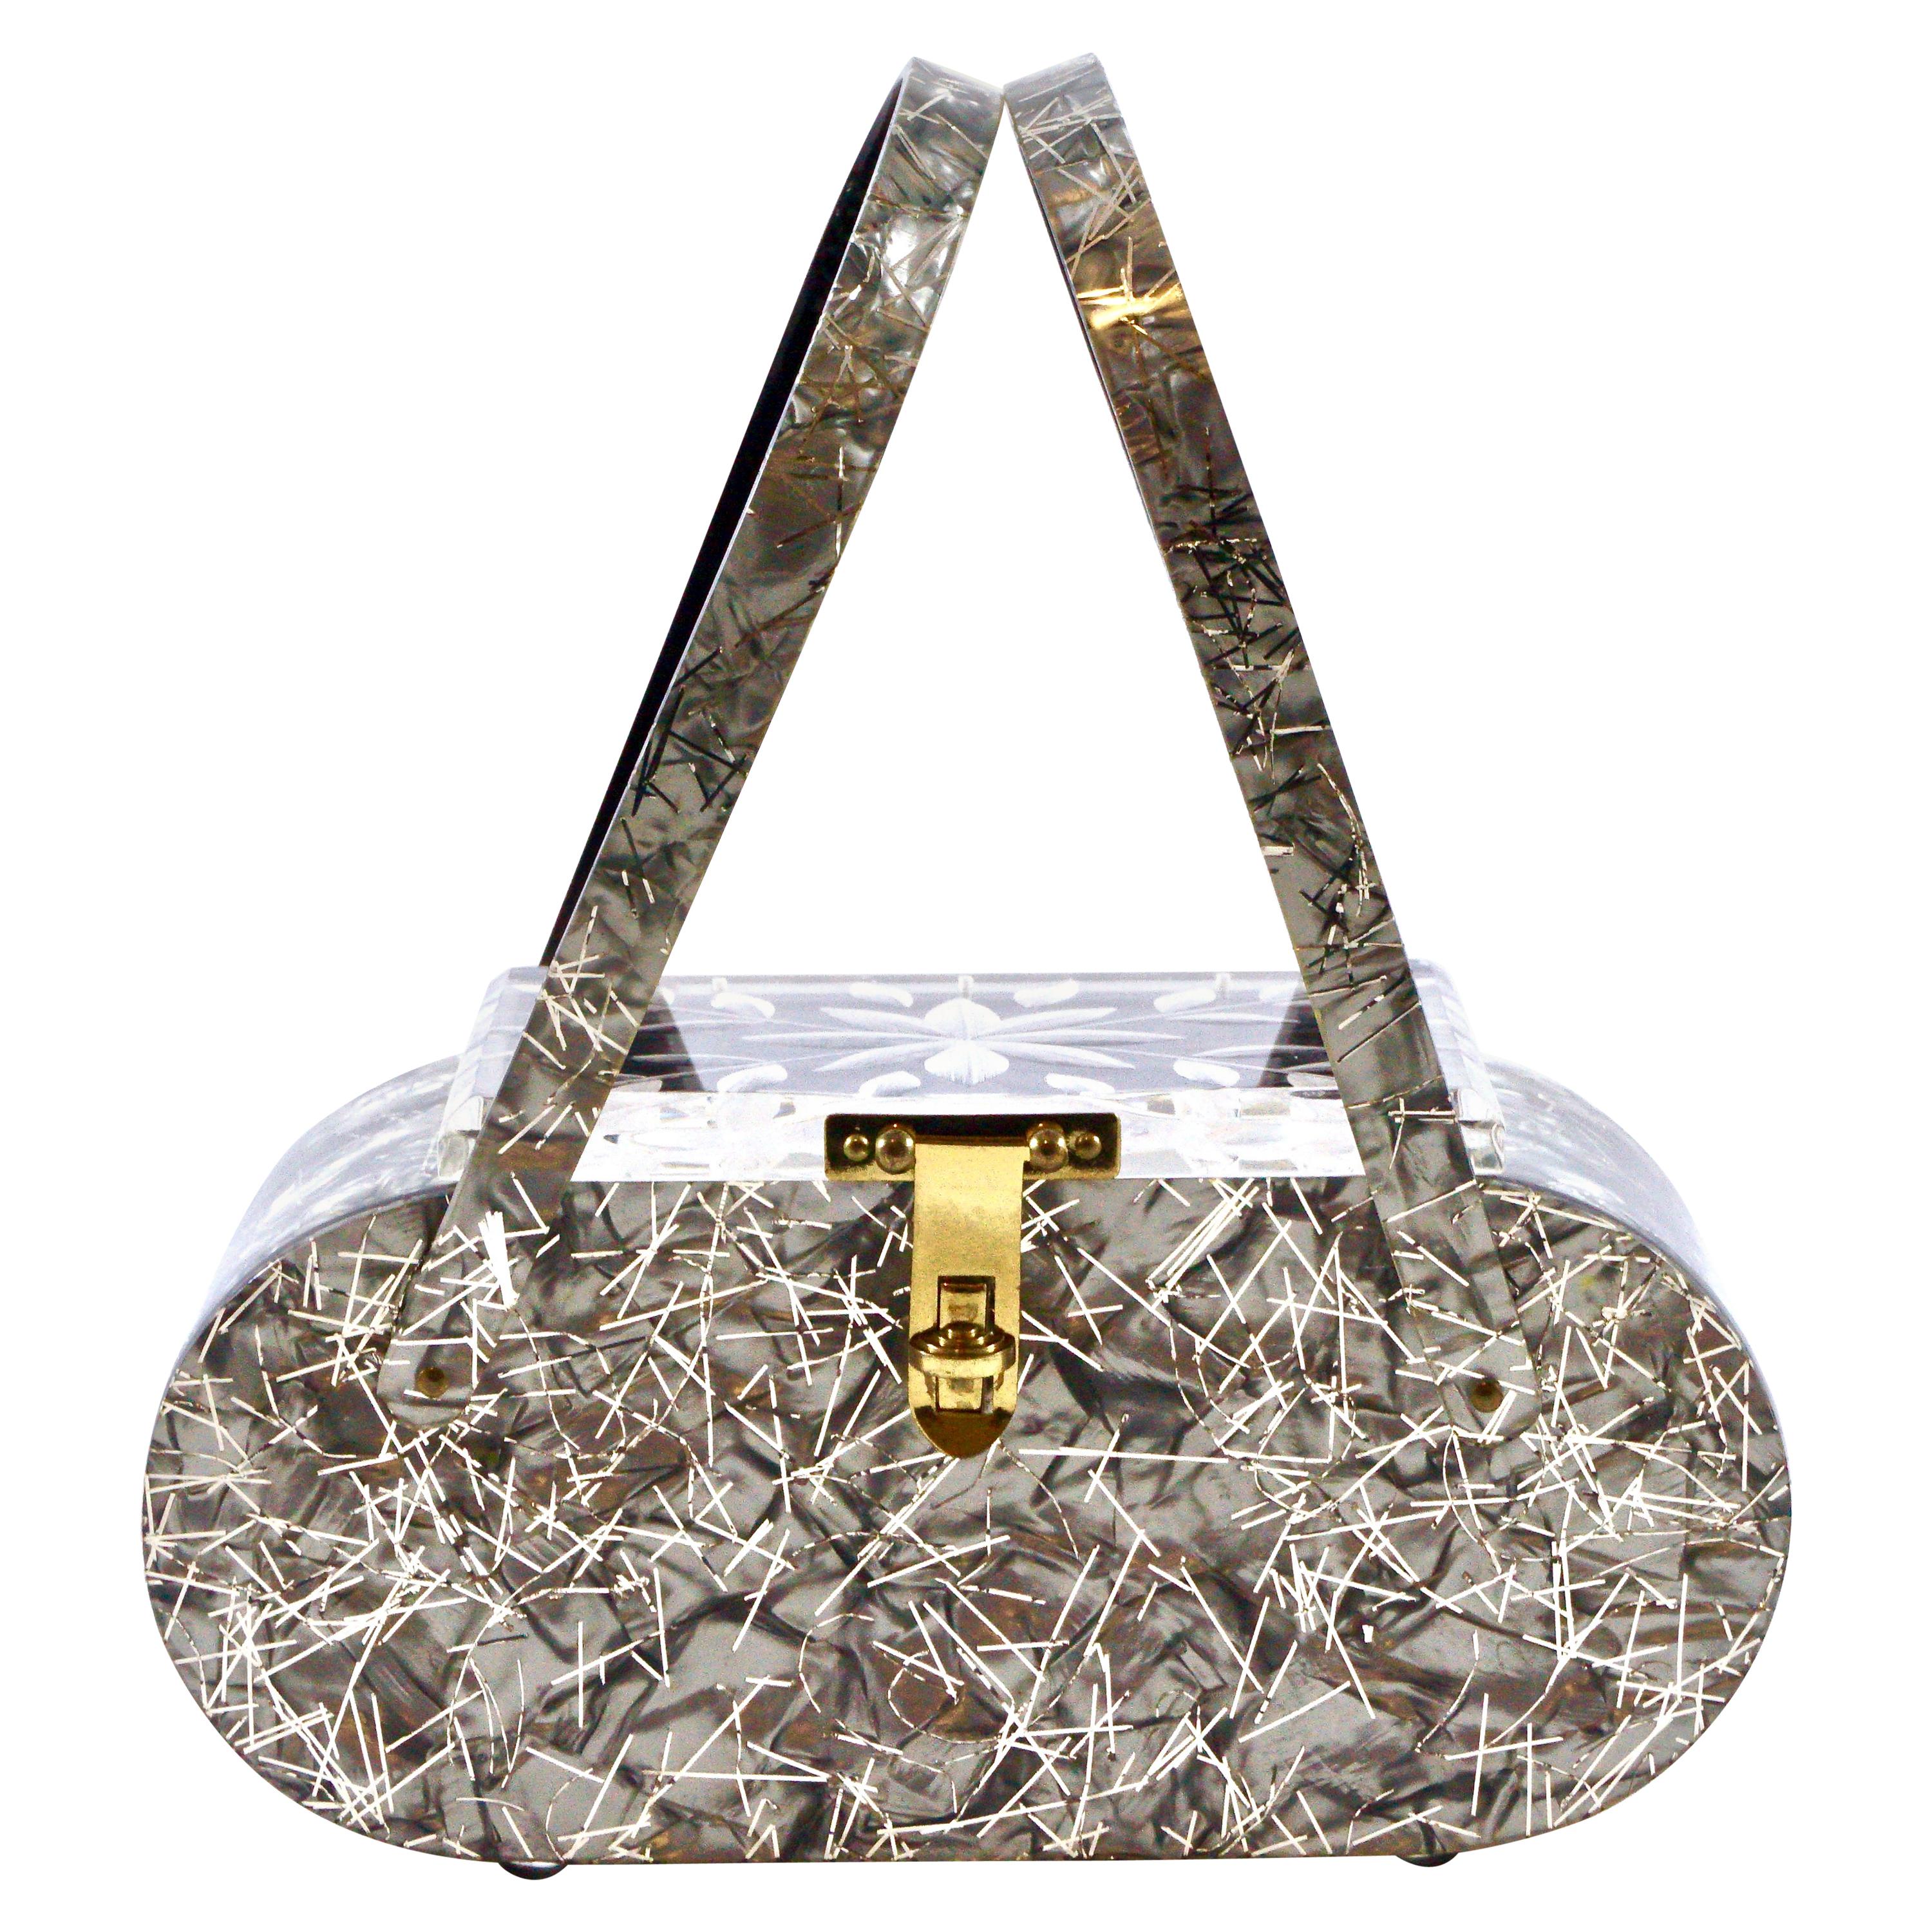 1950s Grey Black and Silver Confetti Lucite Handbag with a Clear Carved Lid